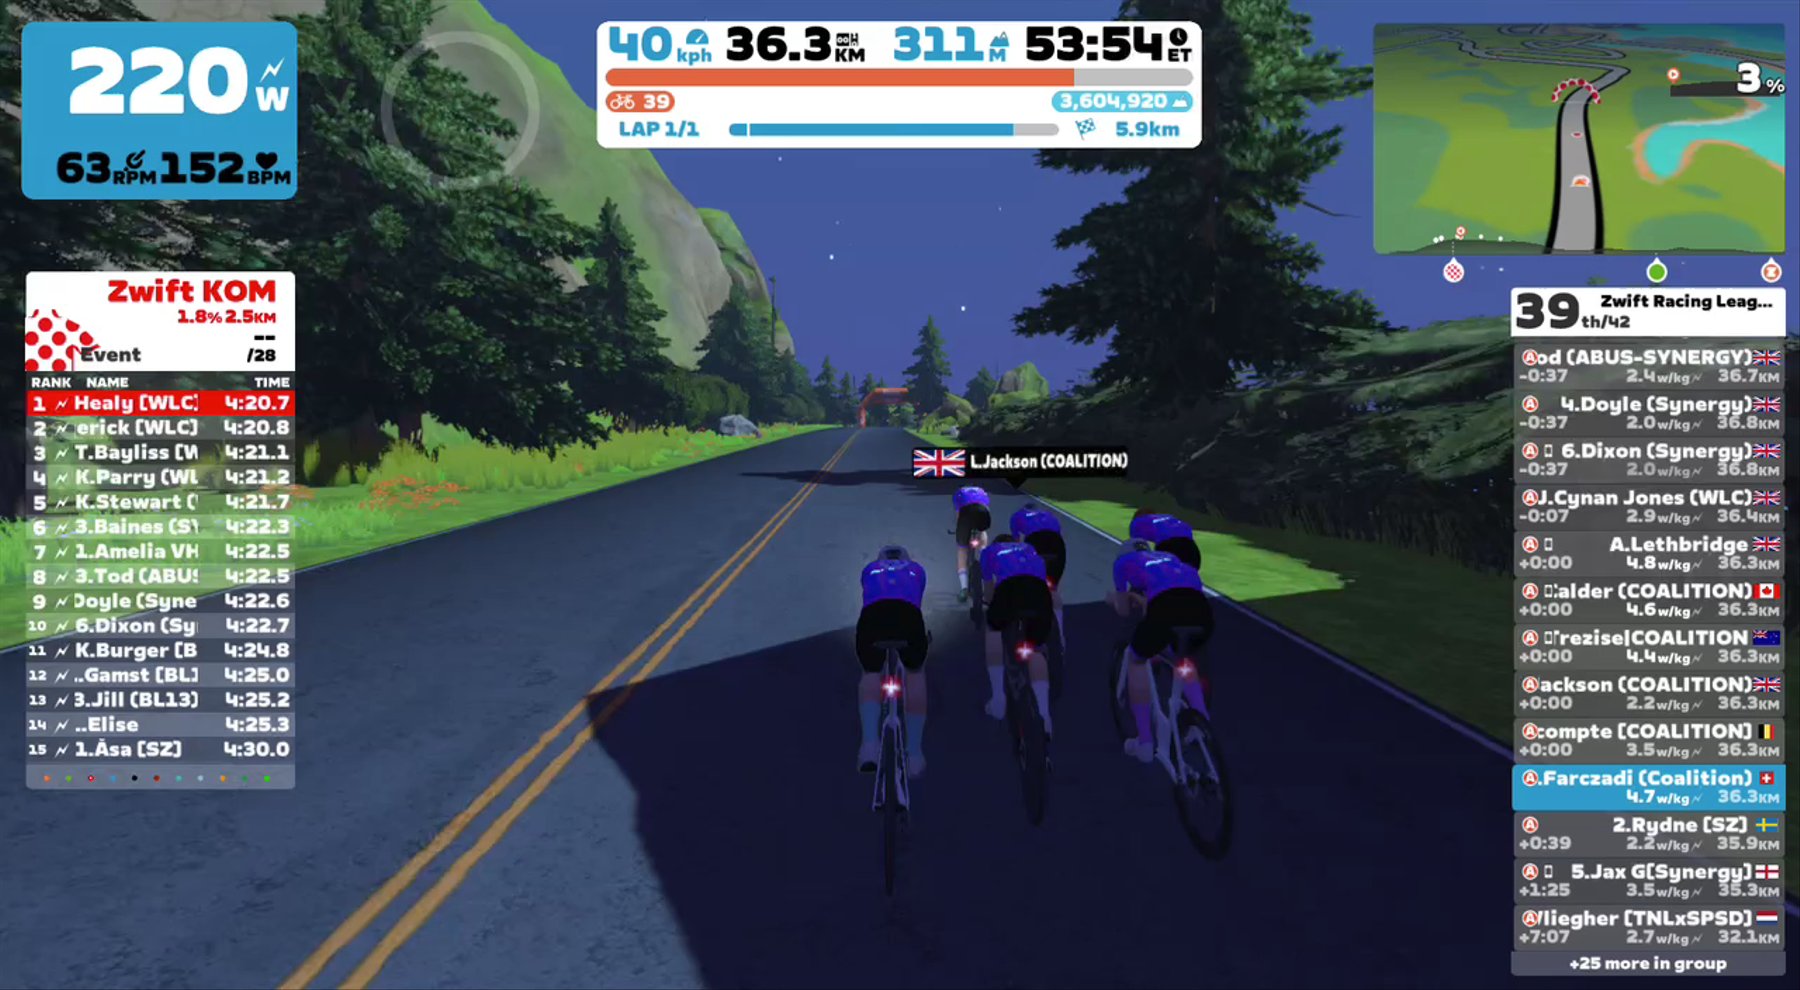 Zwift - TTT: Zwift Racing League - Womens EMEAE Central 1 A1 on Out And Back Again in Watopia